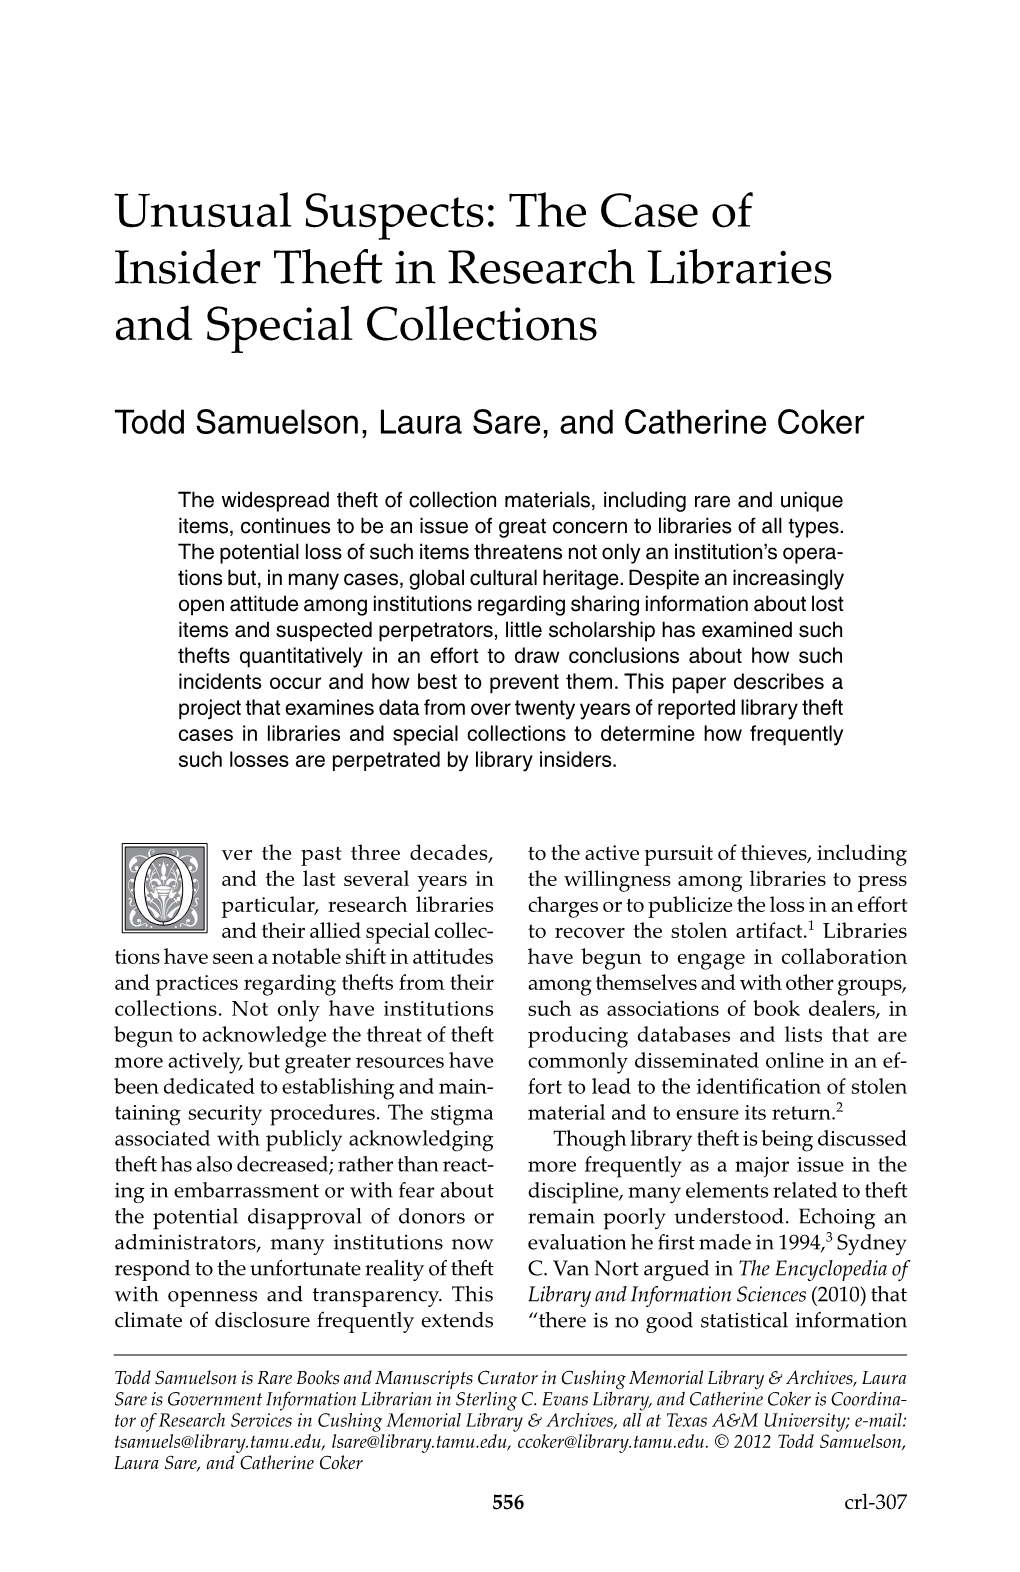 The Case of Insider Theft in Research Libraries and Special Collections